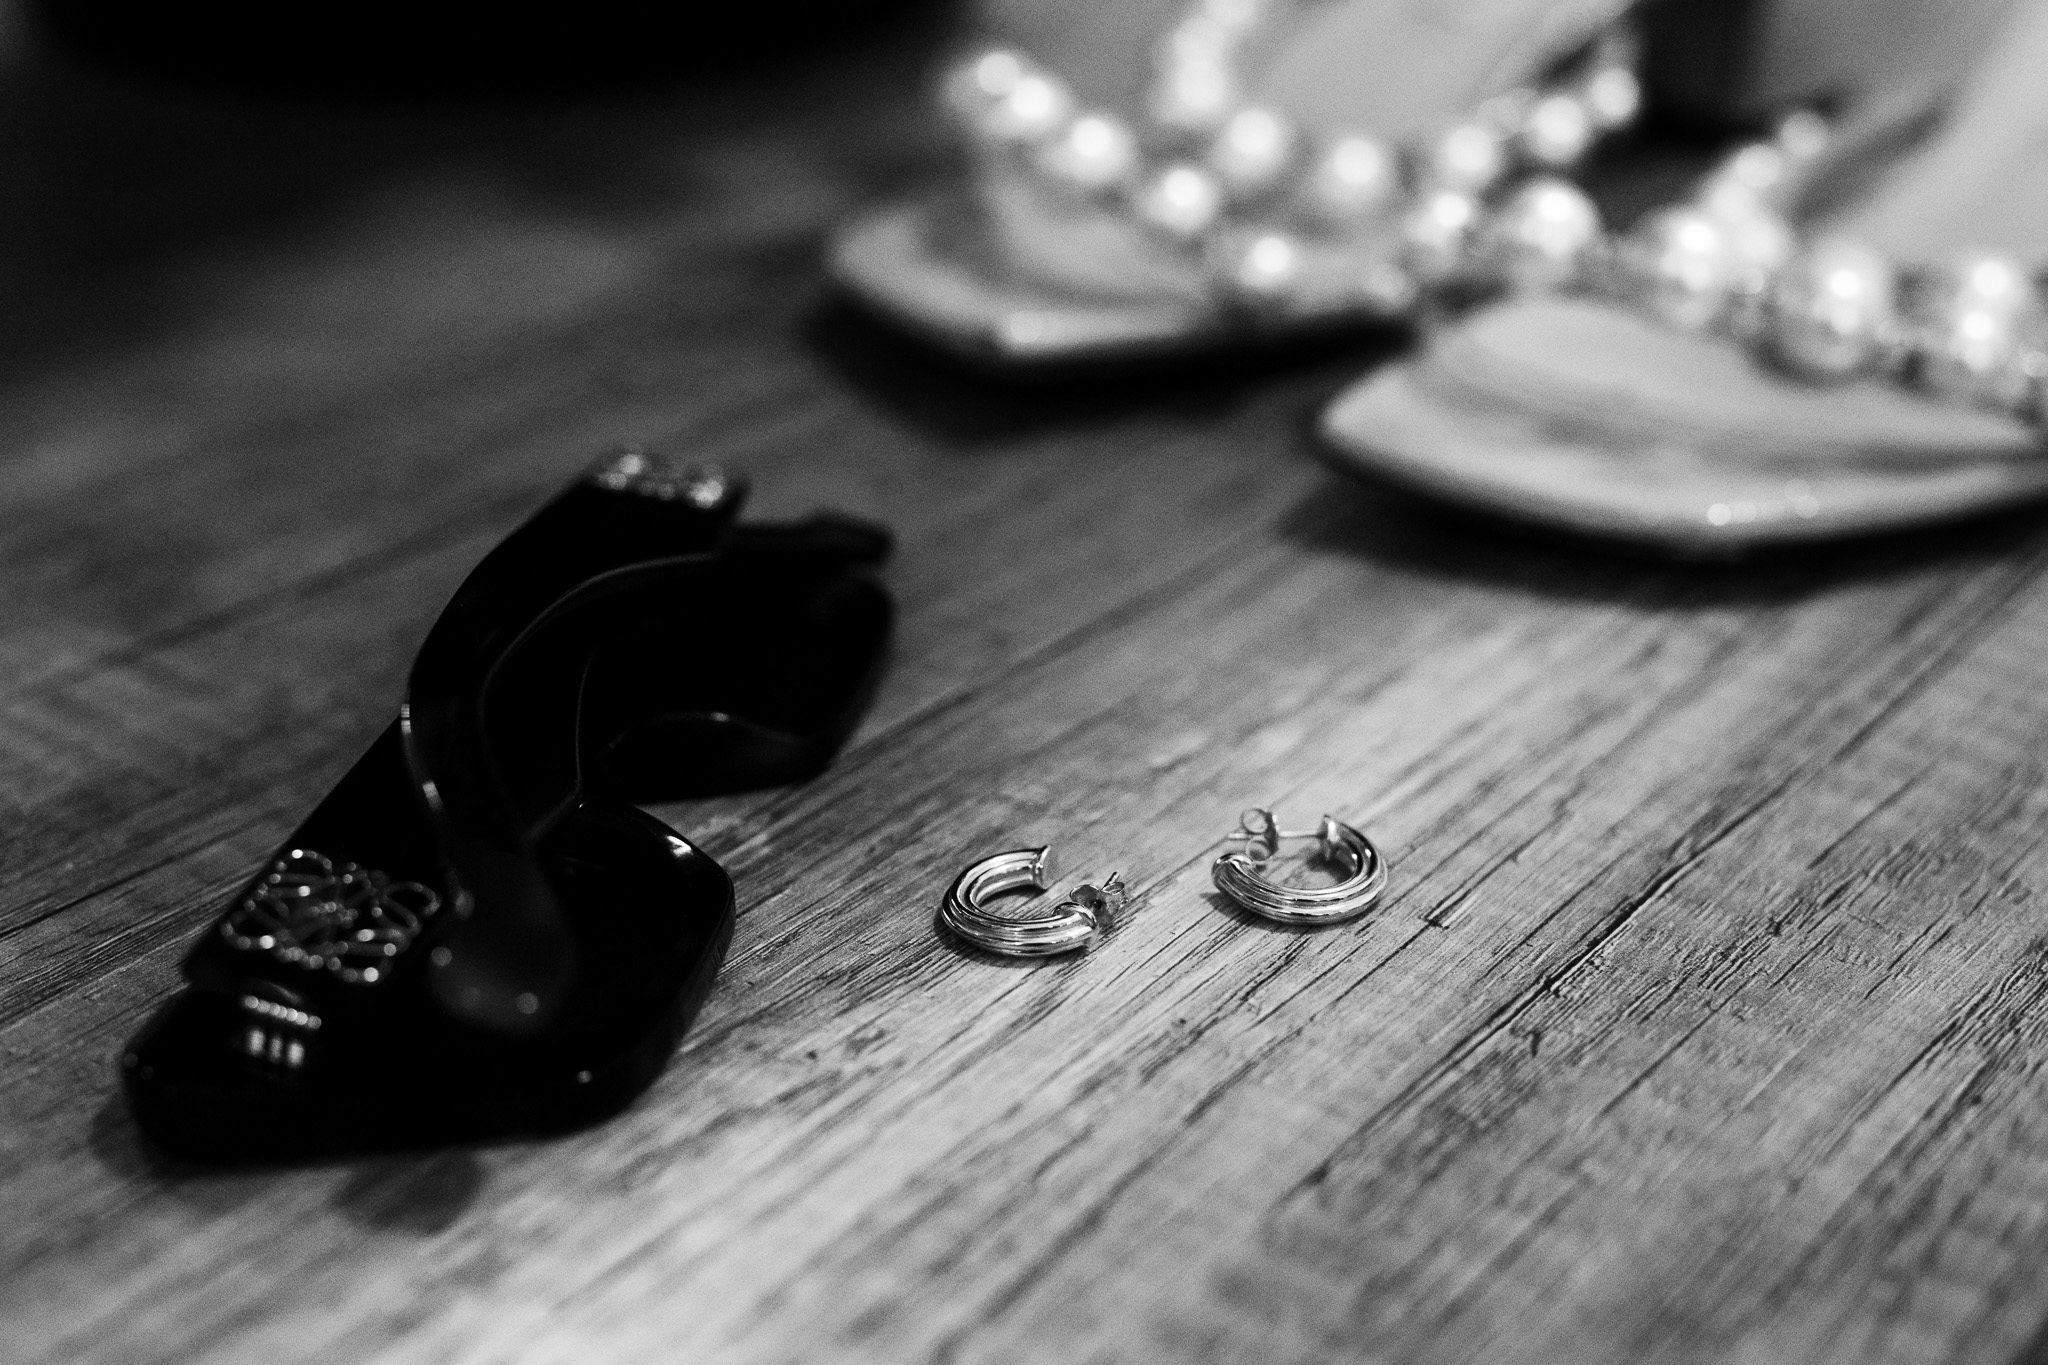 Wedding accessories lying on a table.